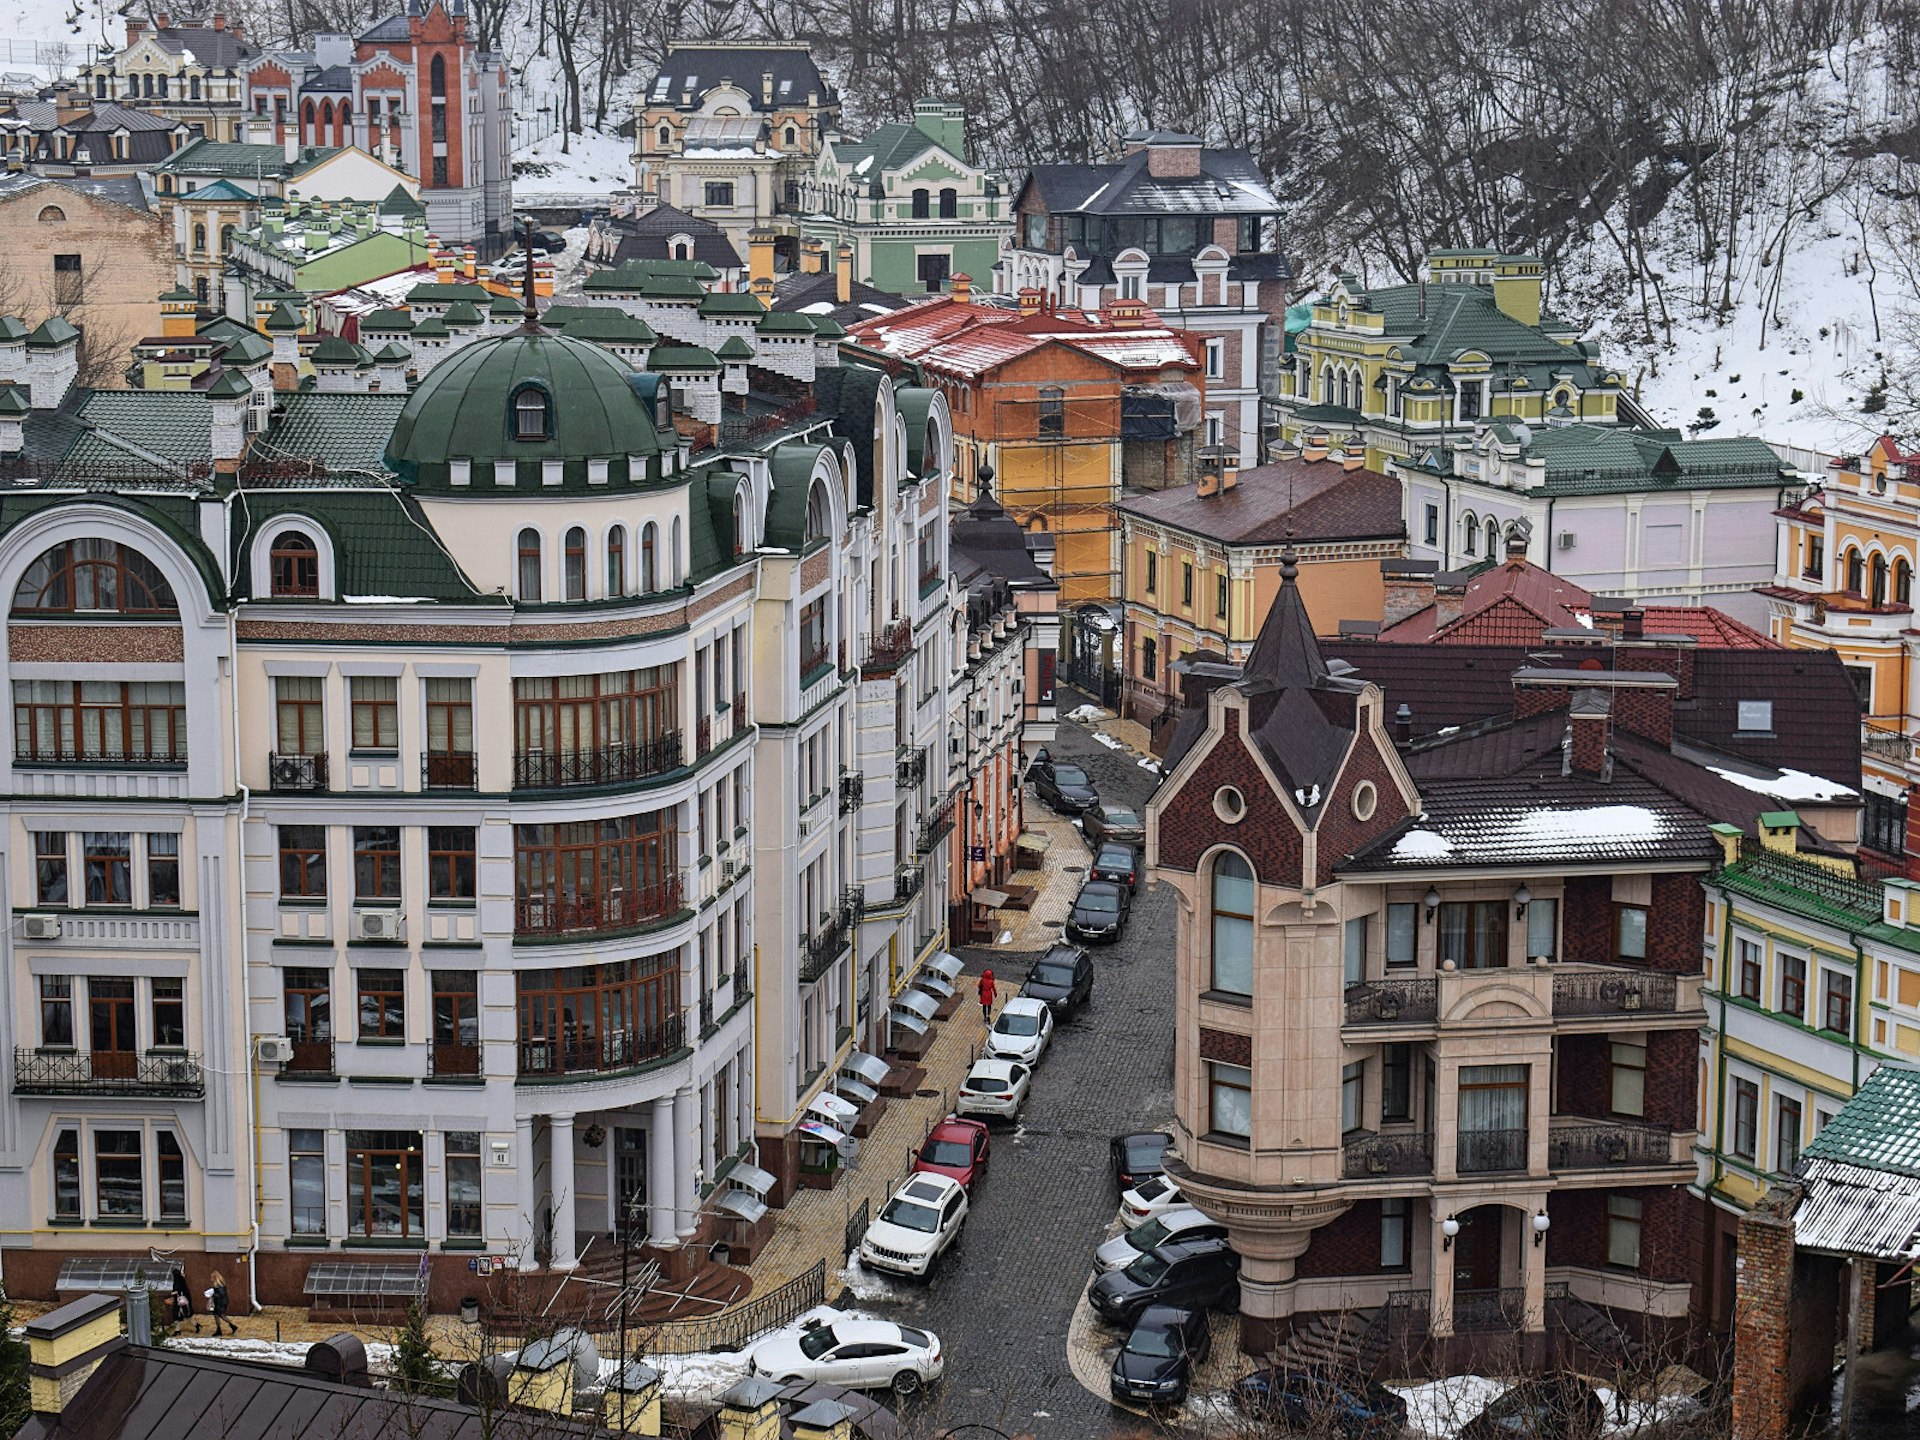 The panorama of Vozdvyzhenka district from the Castle Hill in Kyiv © Pavlo Fedykovych / Lonely Planet